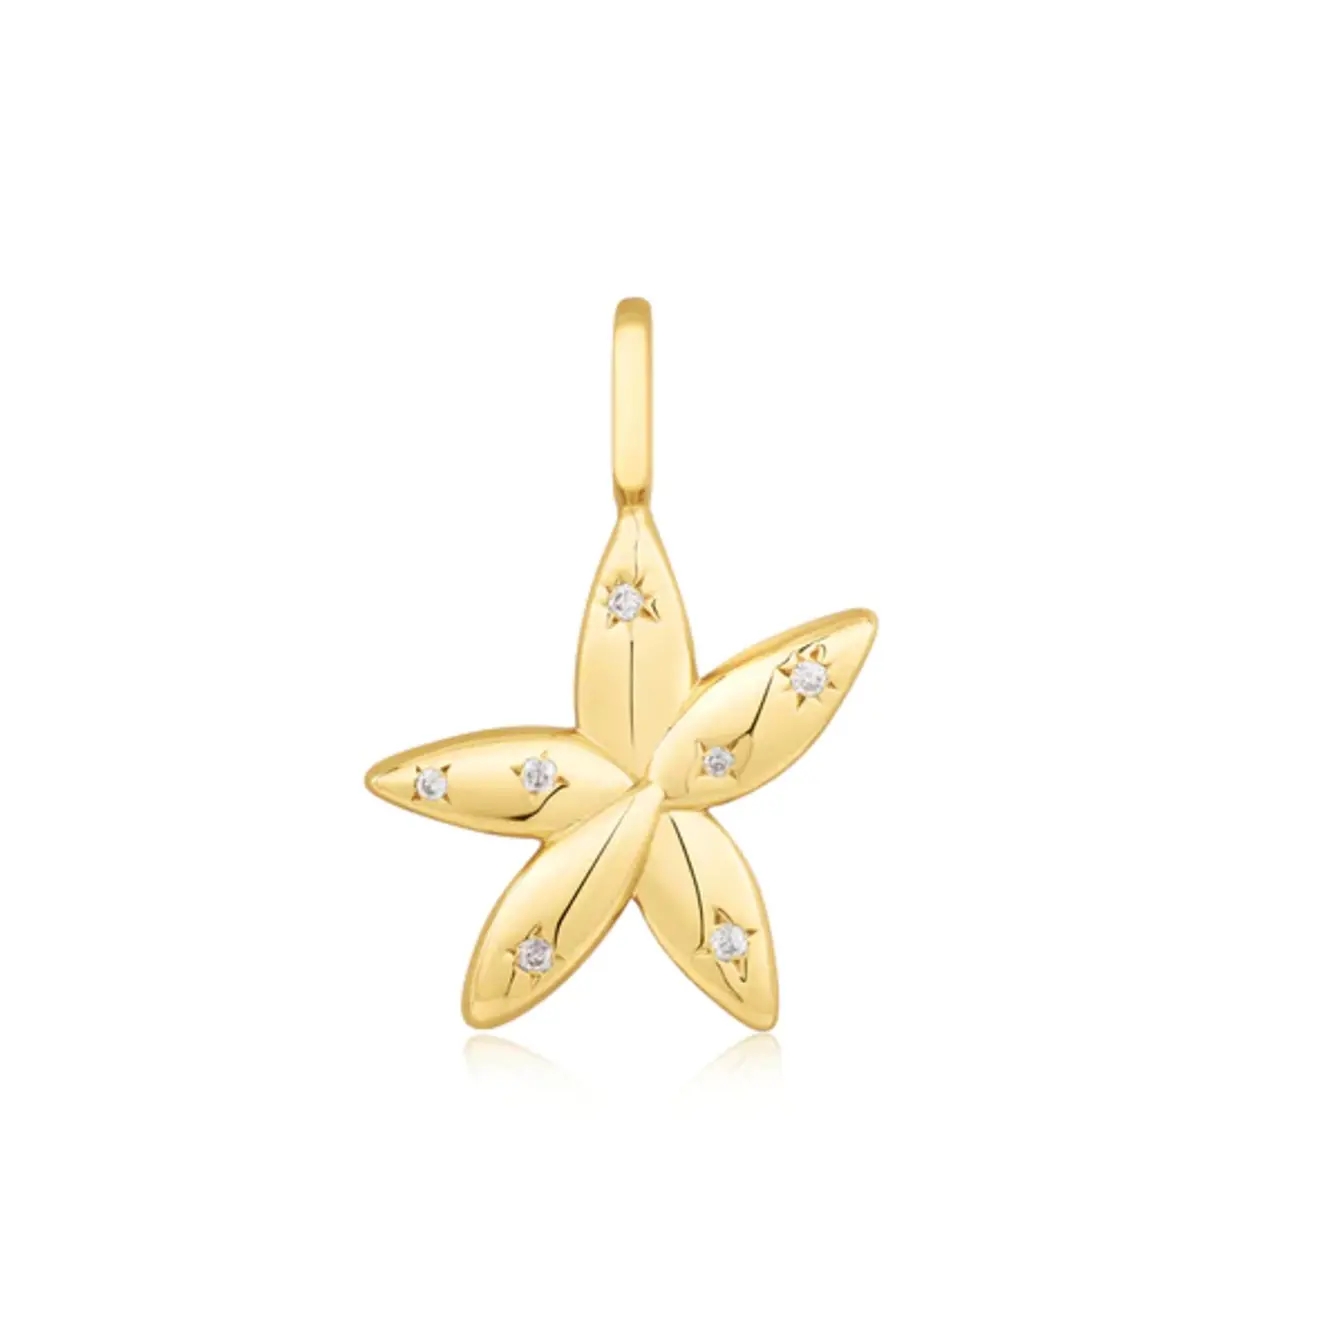 Sparkle flower charm voor ketting of armband